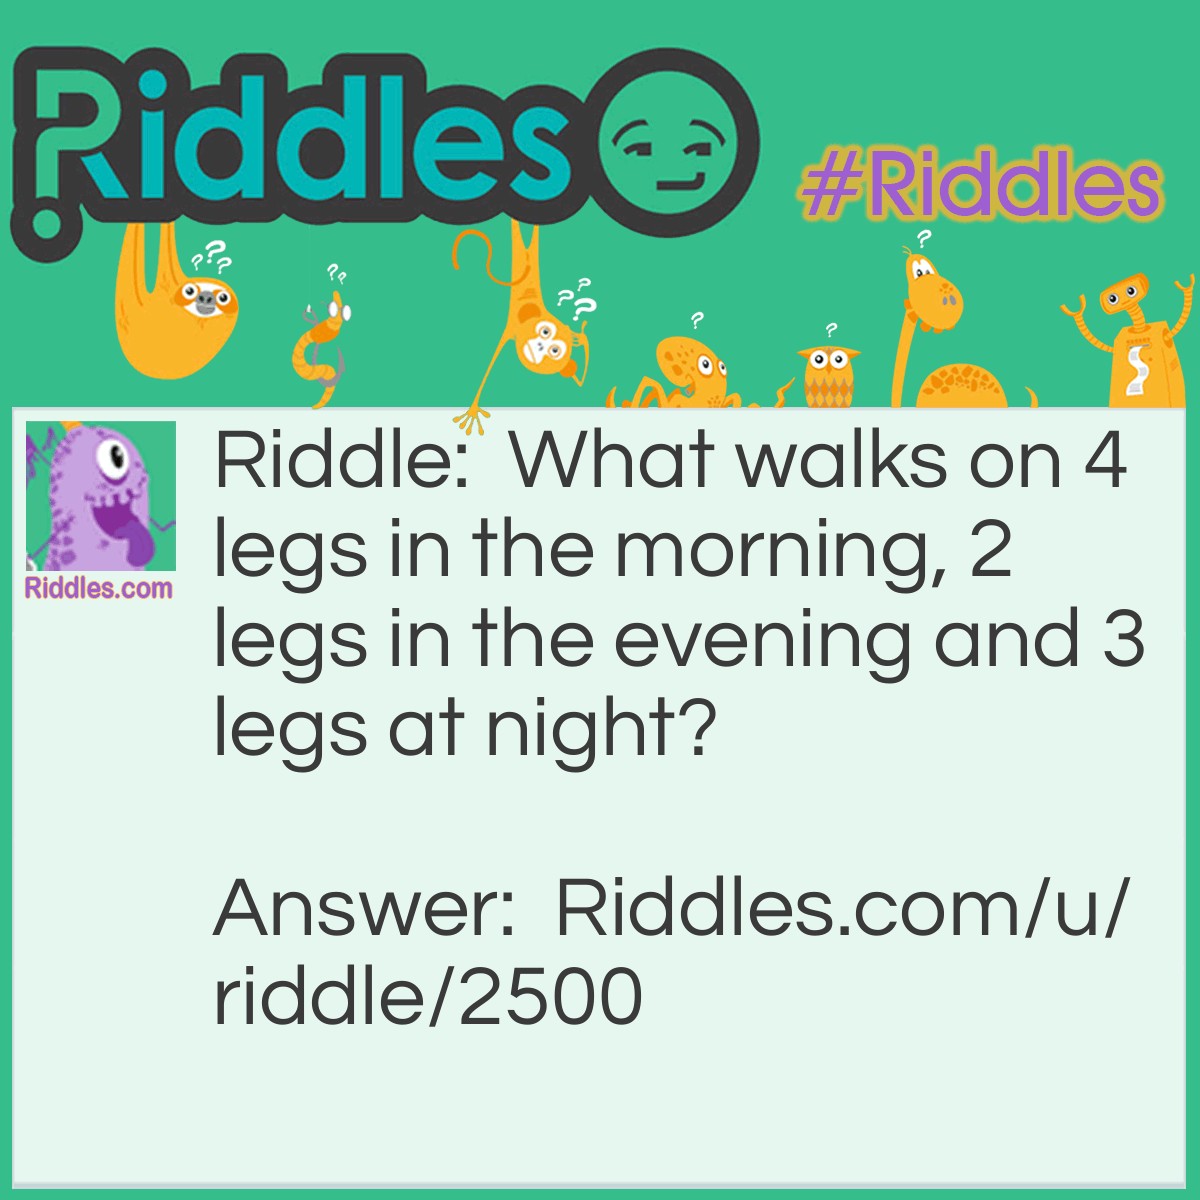 Riddle: What walks on 4 legs in the morning, 2 legs in the evening and 3 legs at night? Answer: A Human.